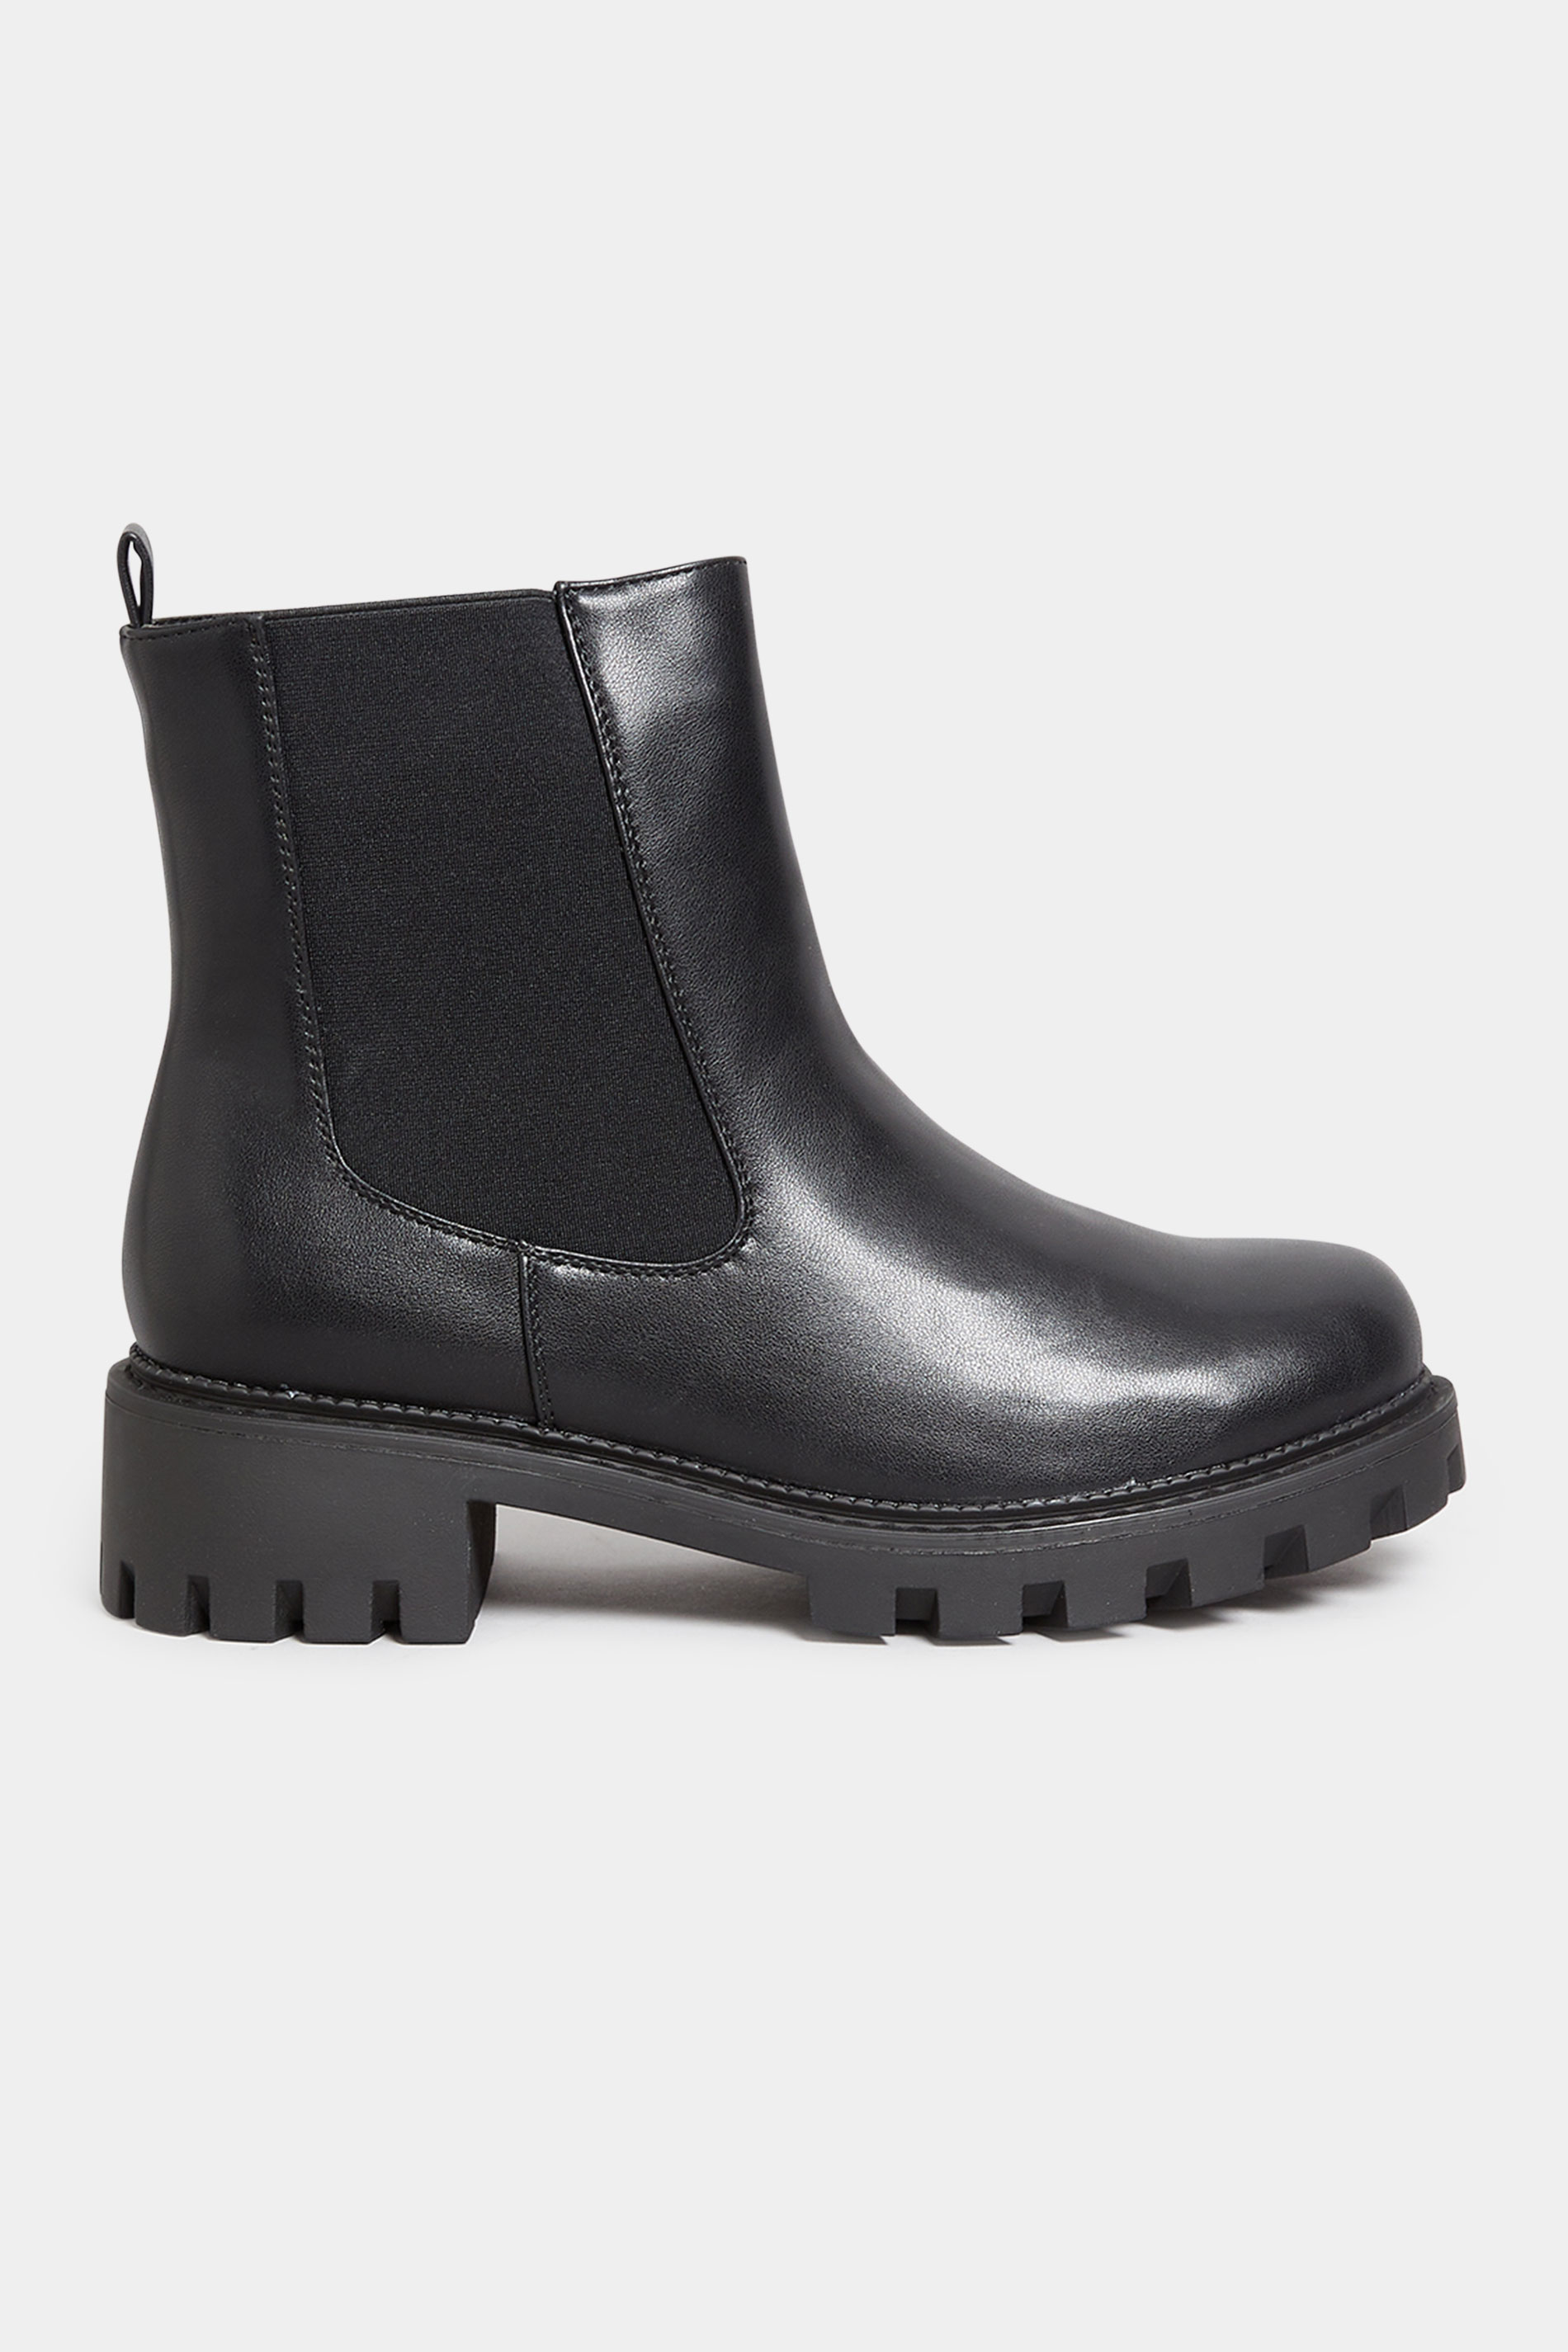 Black Chunky Chelsea Boots In Wide E Fit & Extra Wide EEE Fit | Yours ...